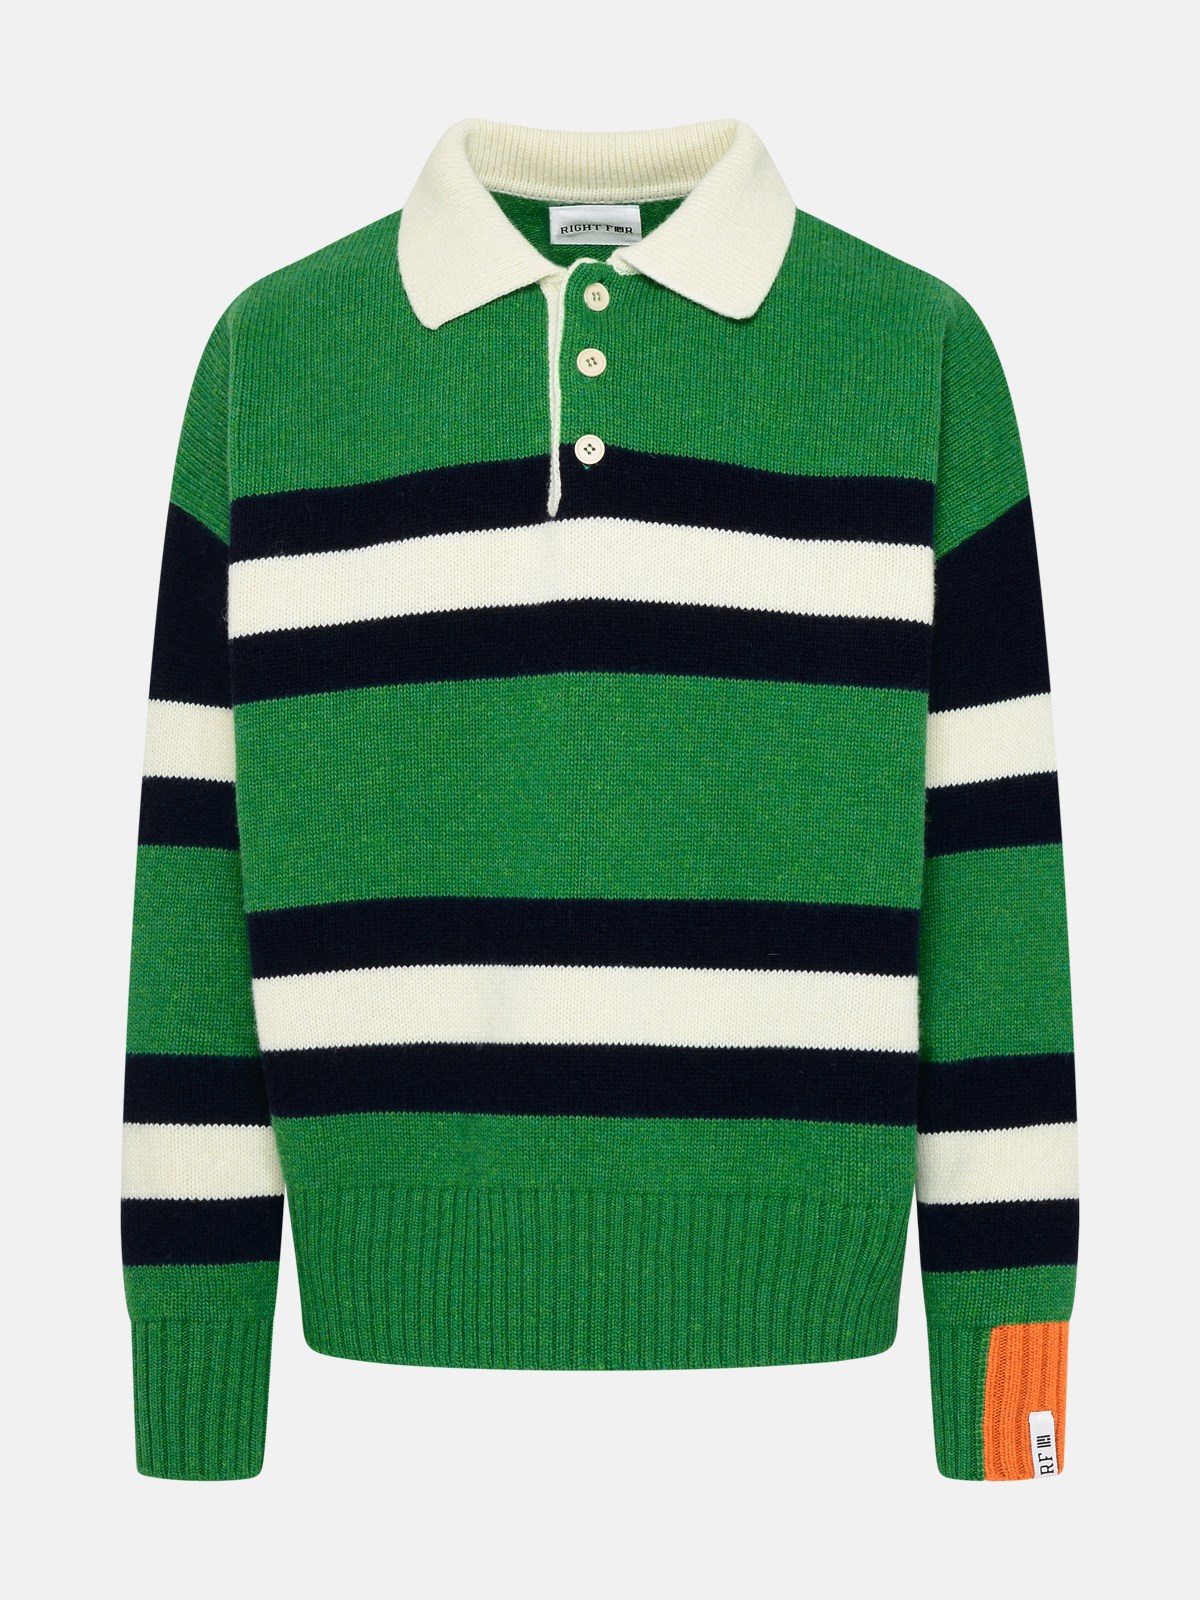 Right For Green Wool Sweater